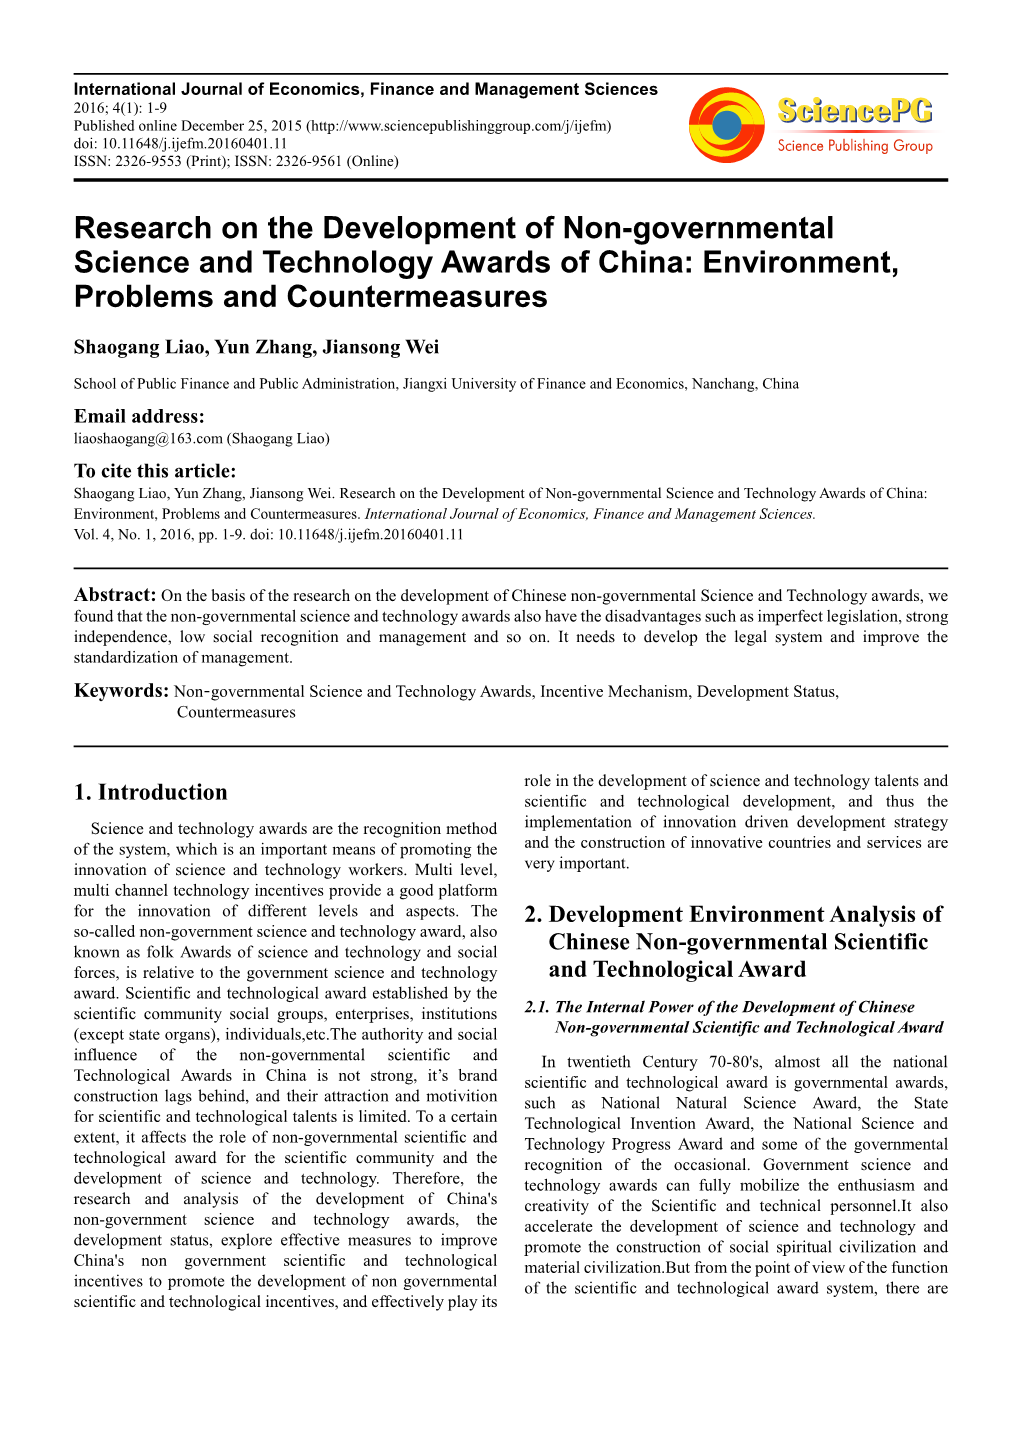 Research on the Development of Non-Governmental Science and Technology Awards of China: Environment, Problems and Countermeasures